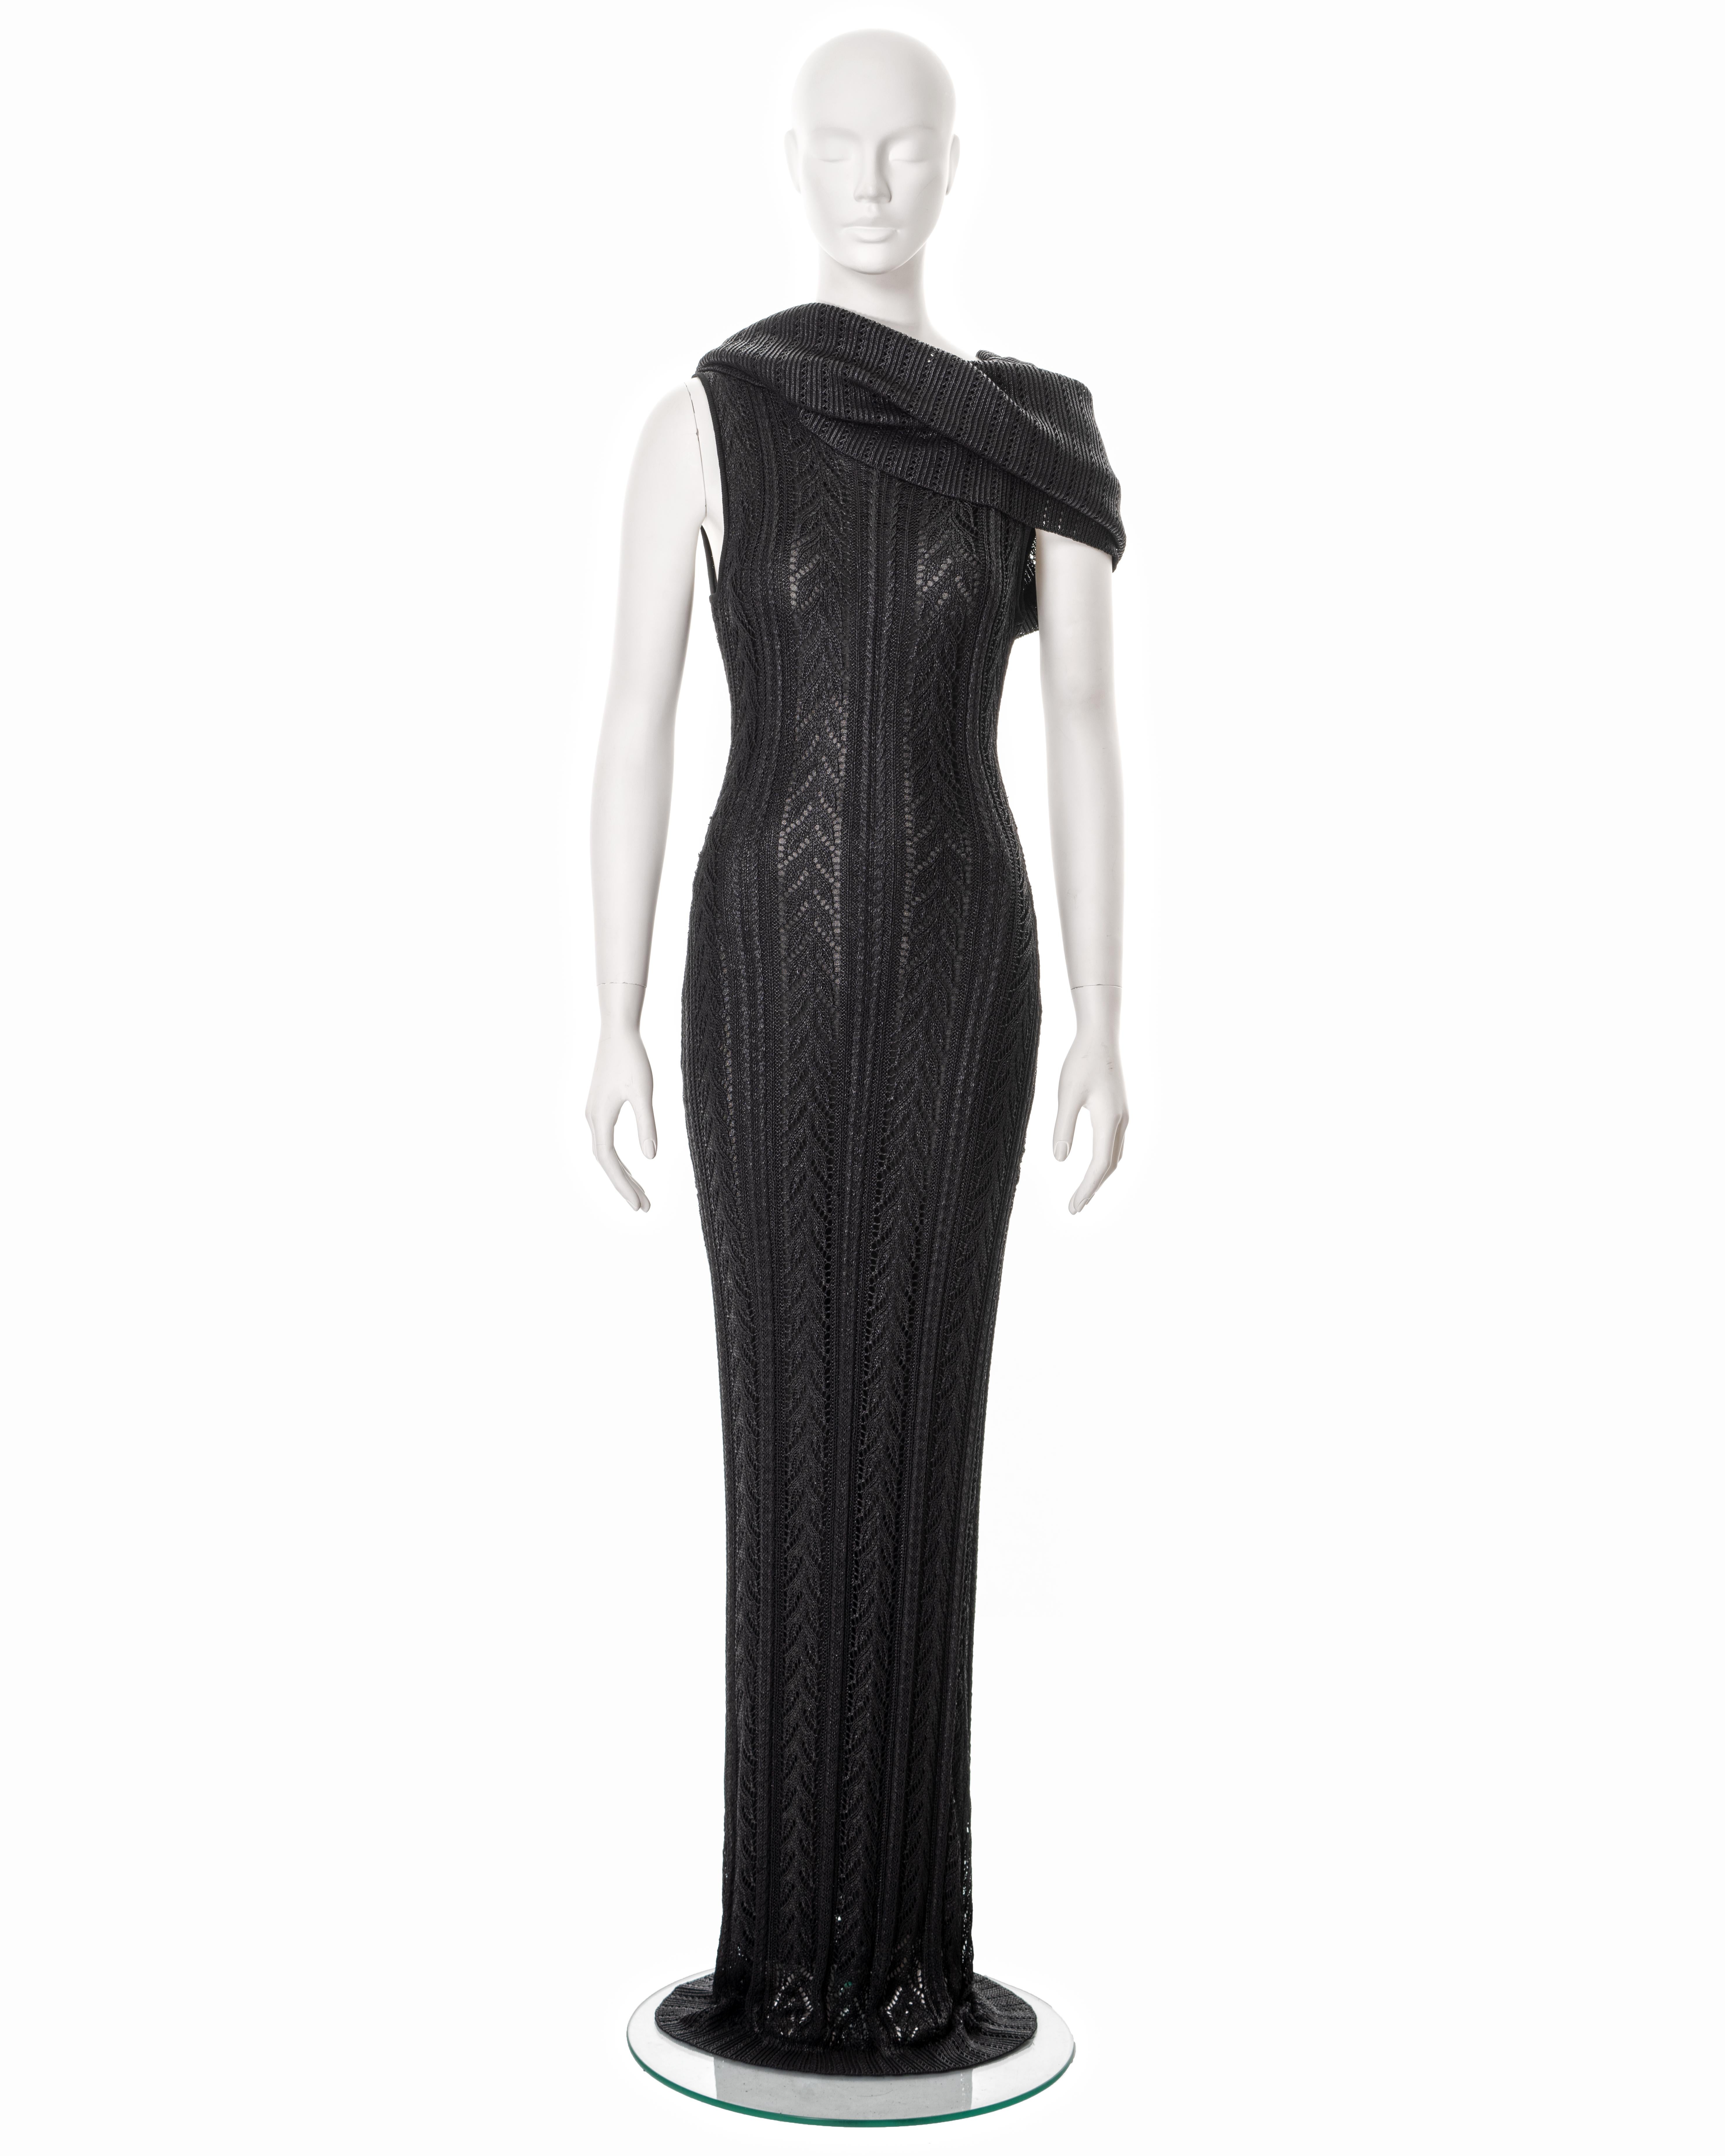 ▪ Christian Dior evening dress
▪ Creative Director: John Galliano
▪ Constructed from black foiled open-knit viscose 
▪ Large turn-over collar which can be draped in multiple ways 
▪ Bodycon fit 
▪ Built-in lining 
▪ Floor-length skirt 
▪ Size FR 40